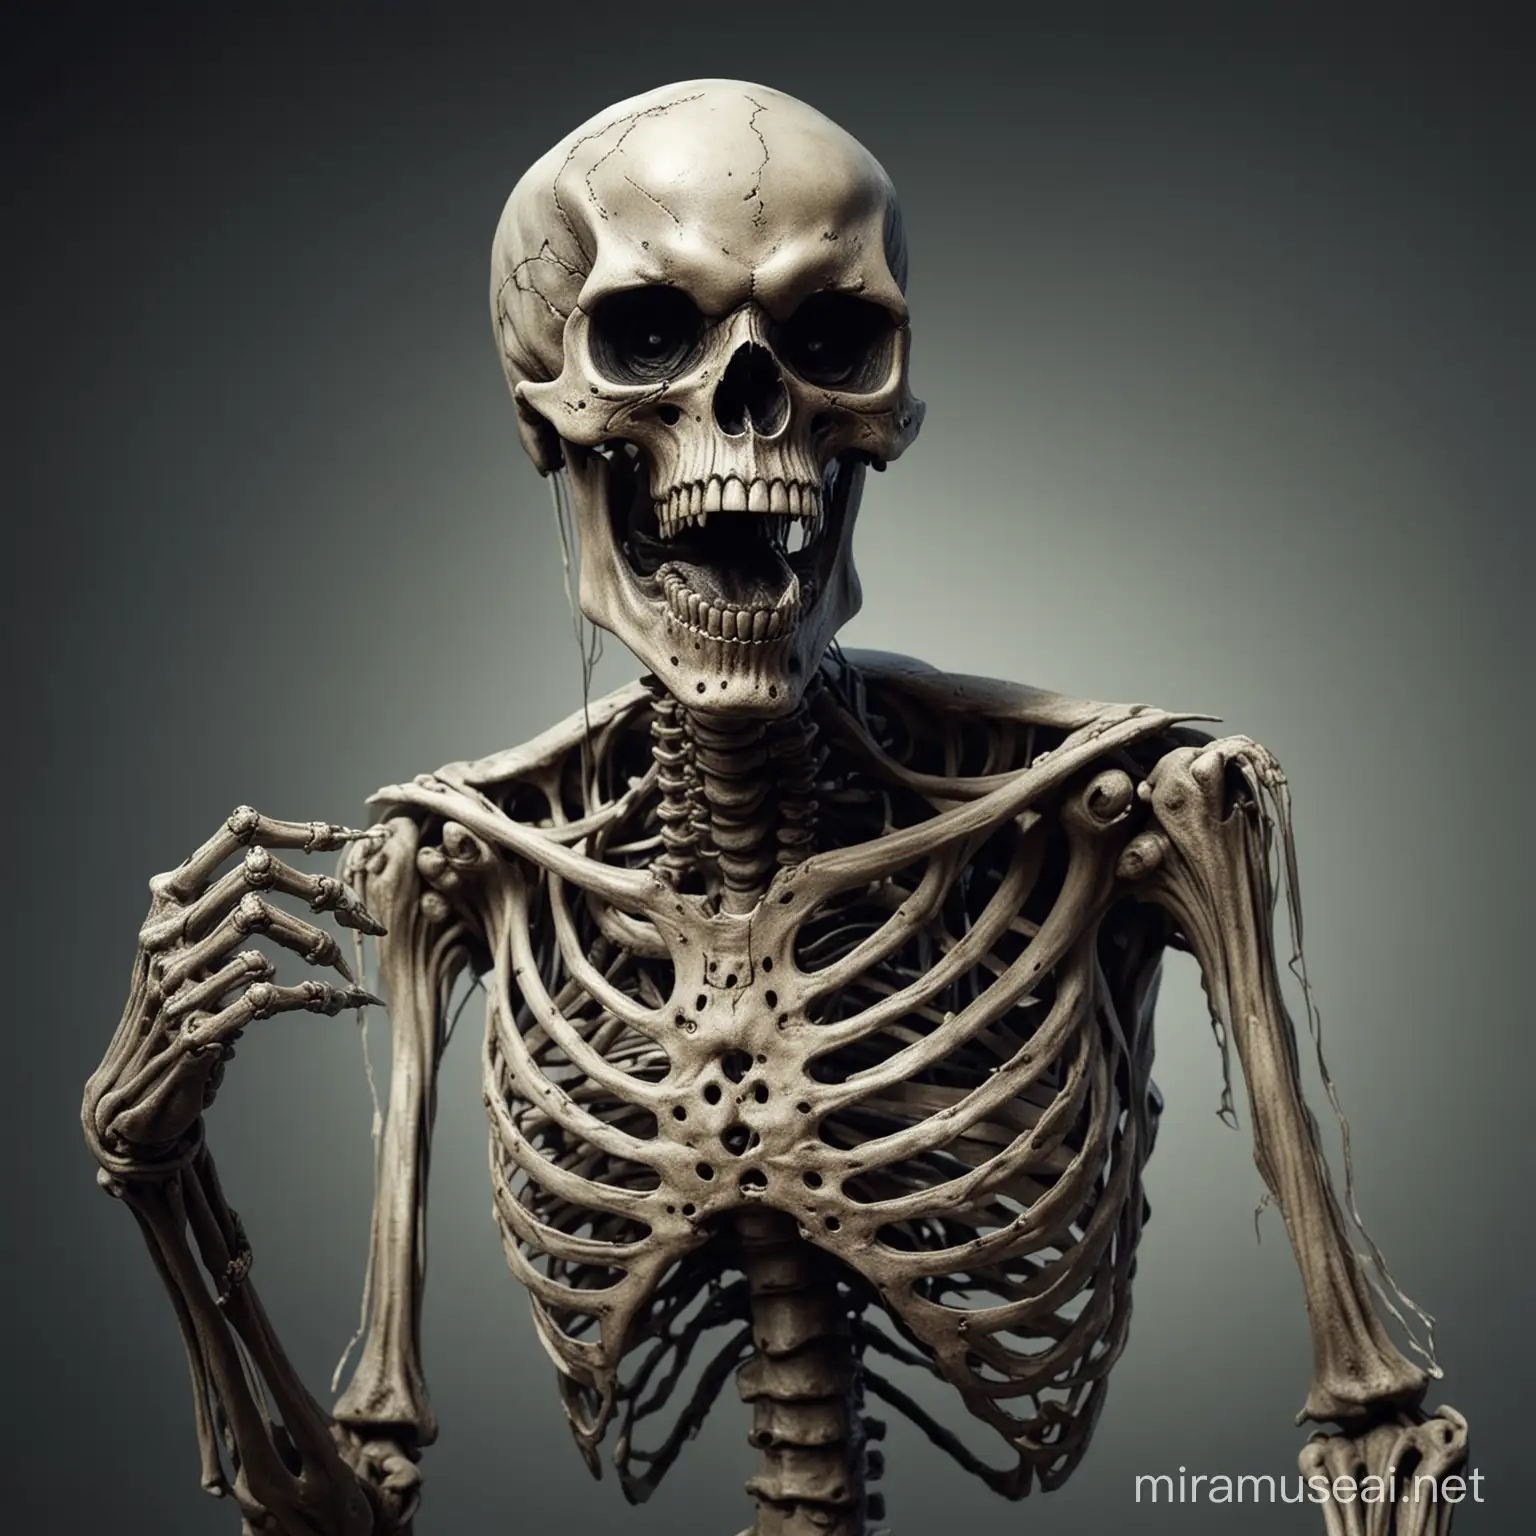 skeleton with an angry expression, pointing at the viewer; realistic style, heavy metal art